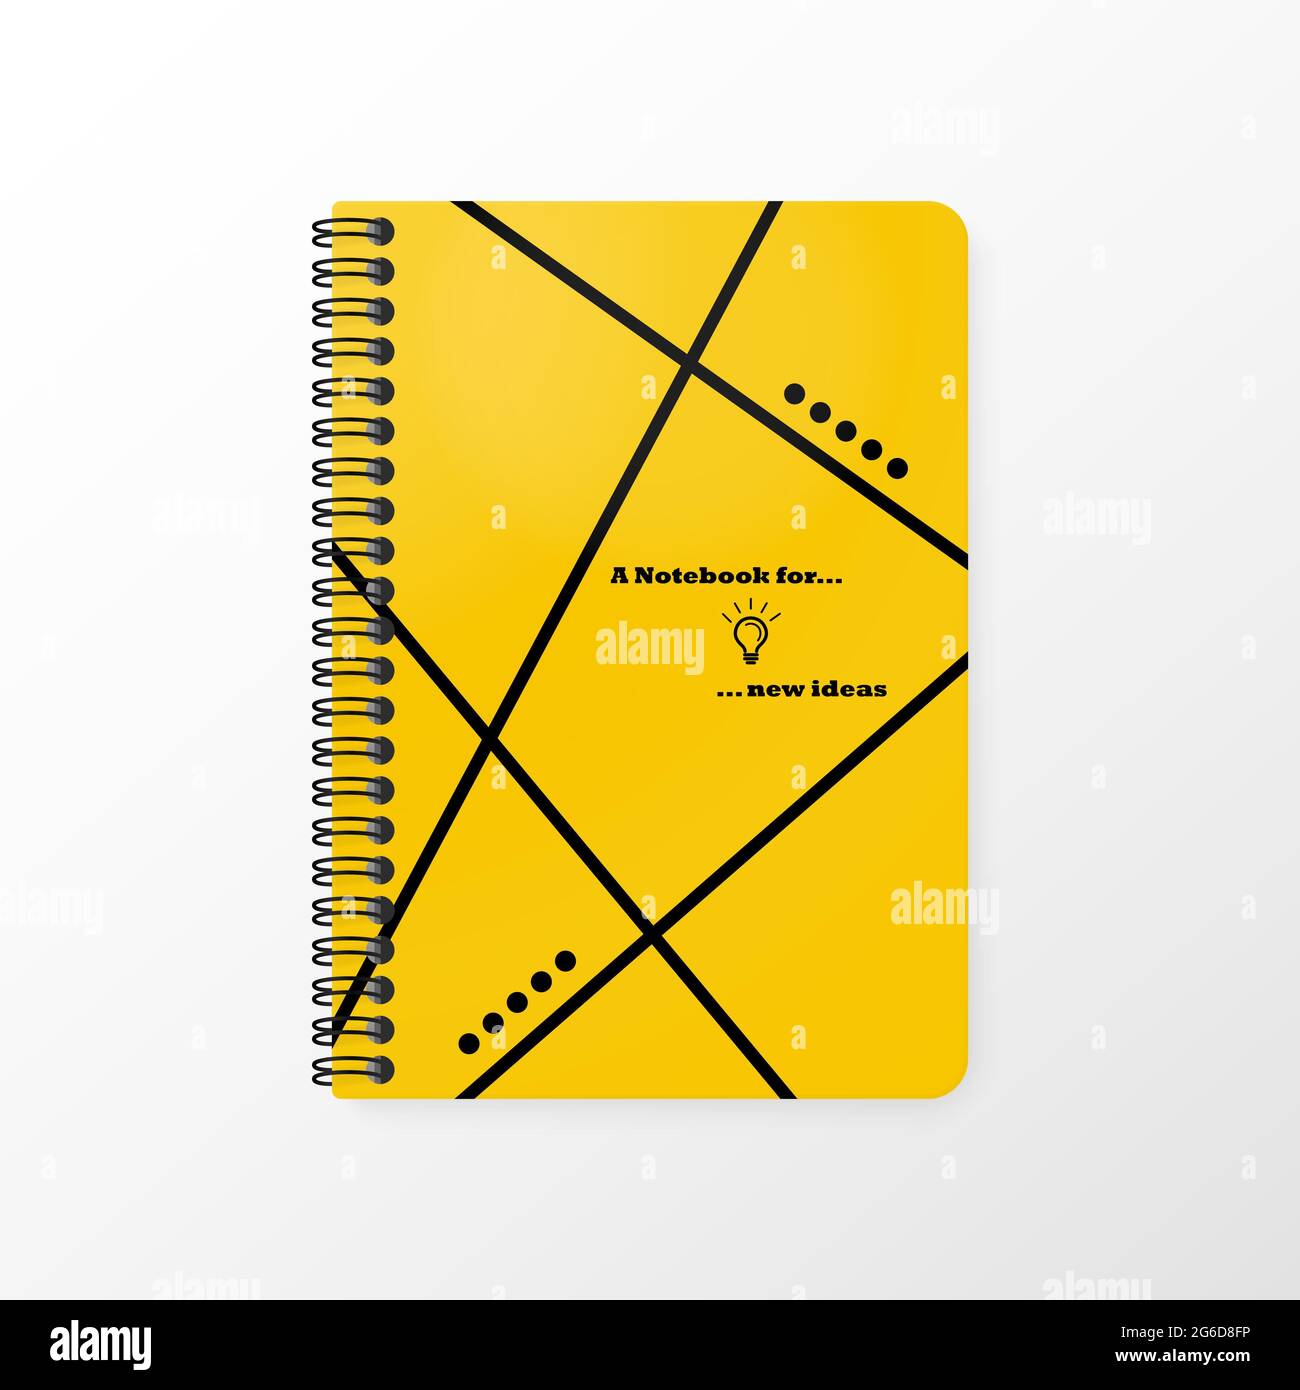 Realistic mock up note book (notepad) in yellow and black corporate colors to jot down your ideas. Stock Photo